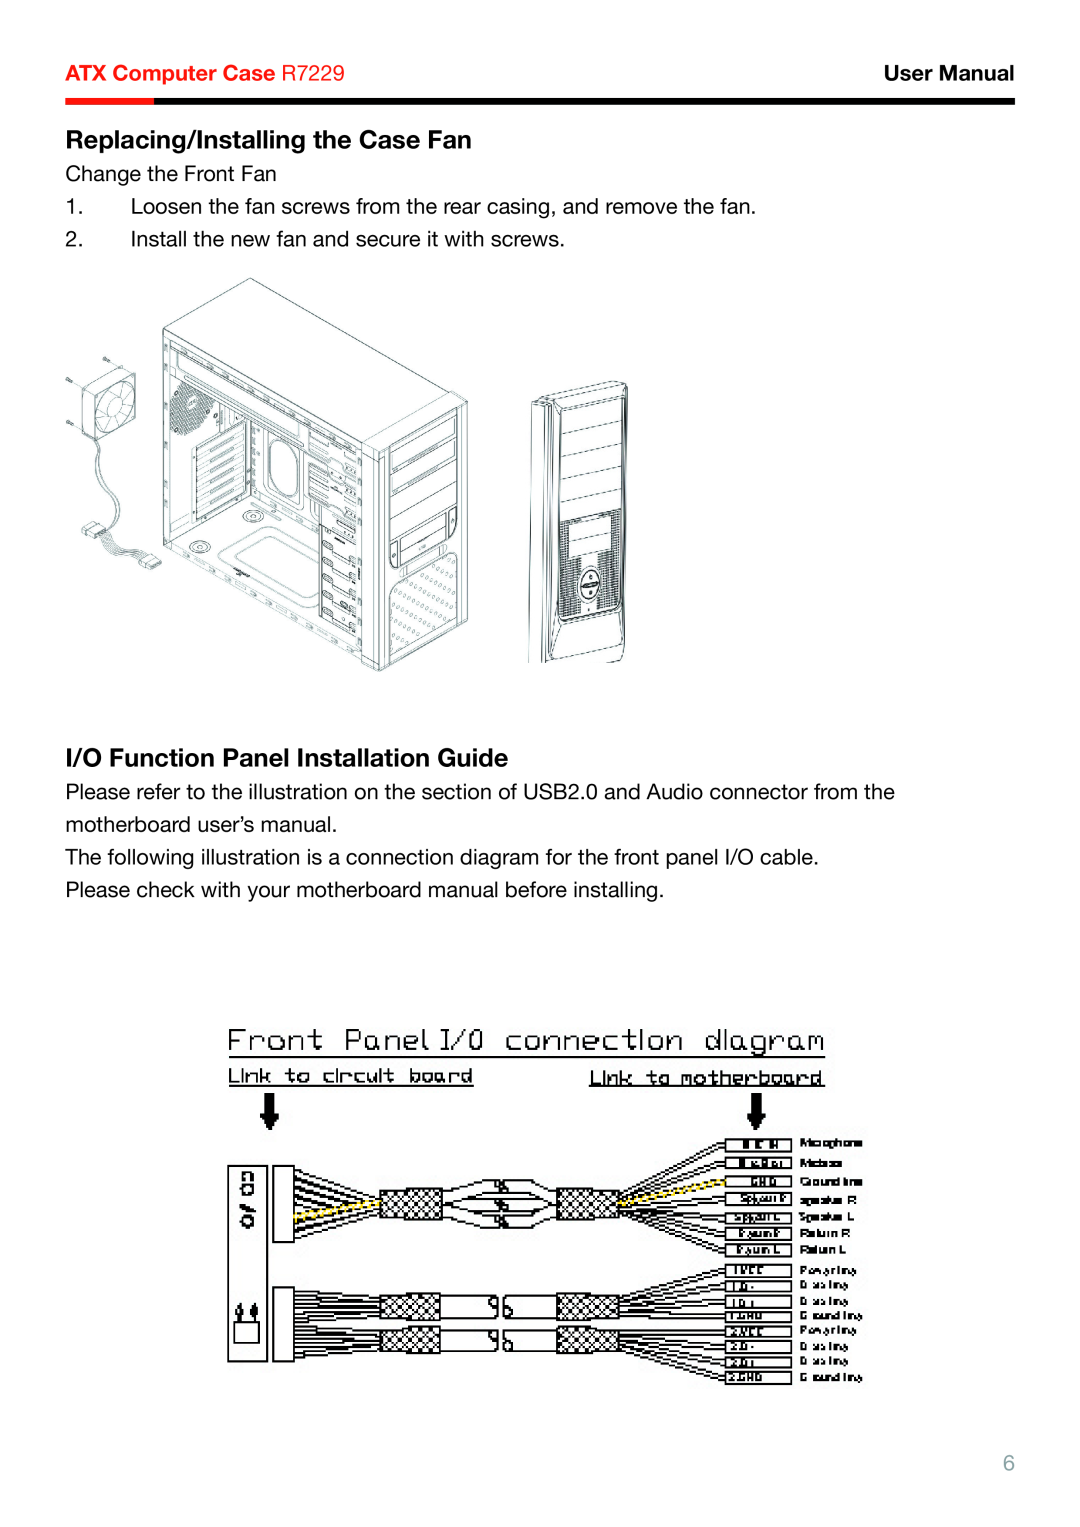 Rosewill Replacing/Installing the Case Fan, I/O Function Panel Installation Guide, ATX Computer Case R7229, User Manual 